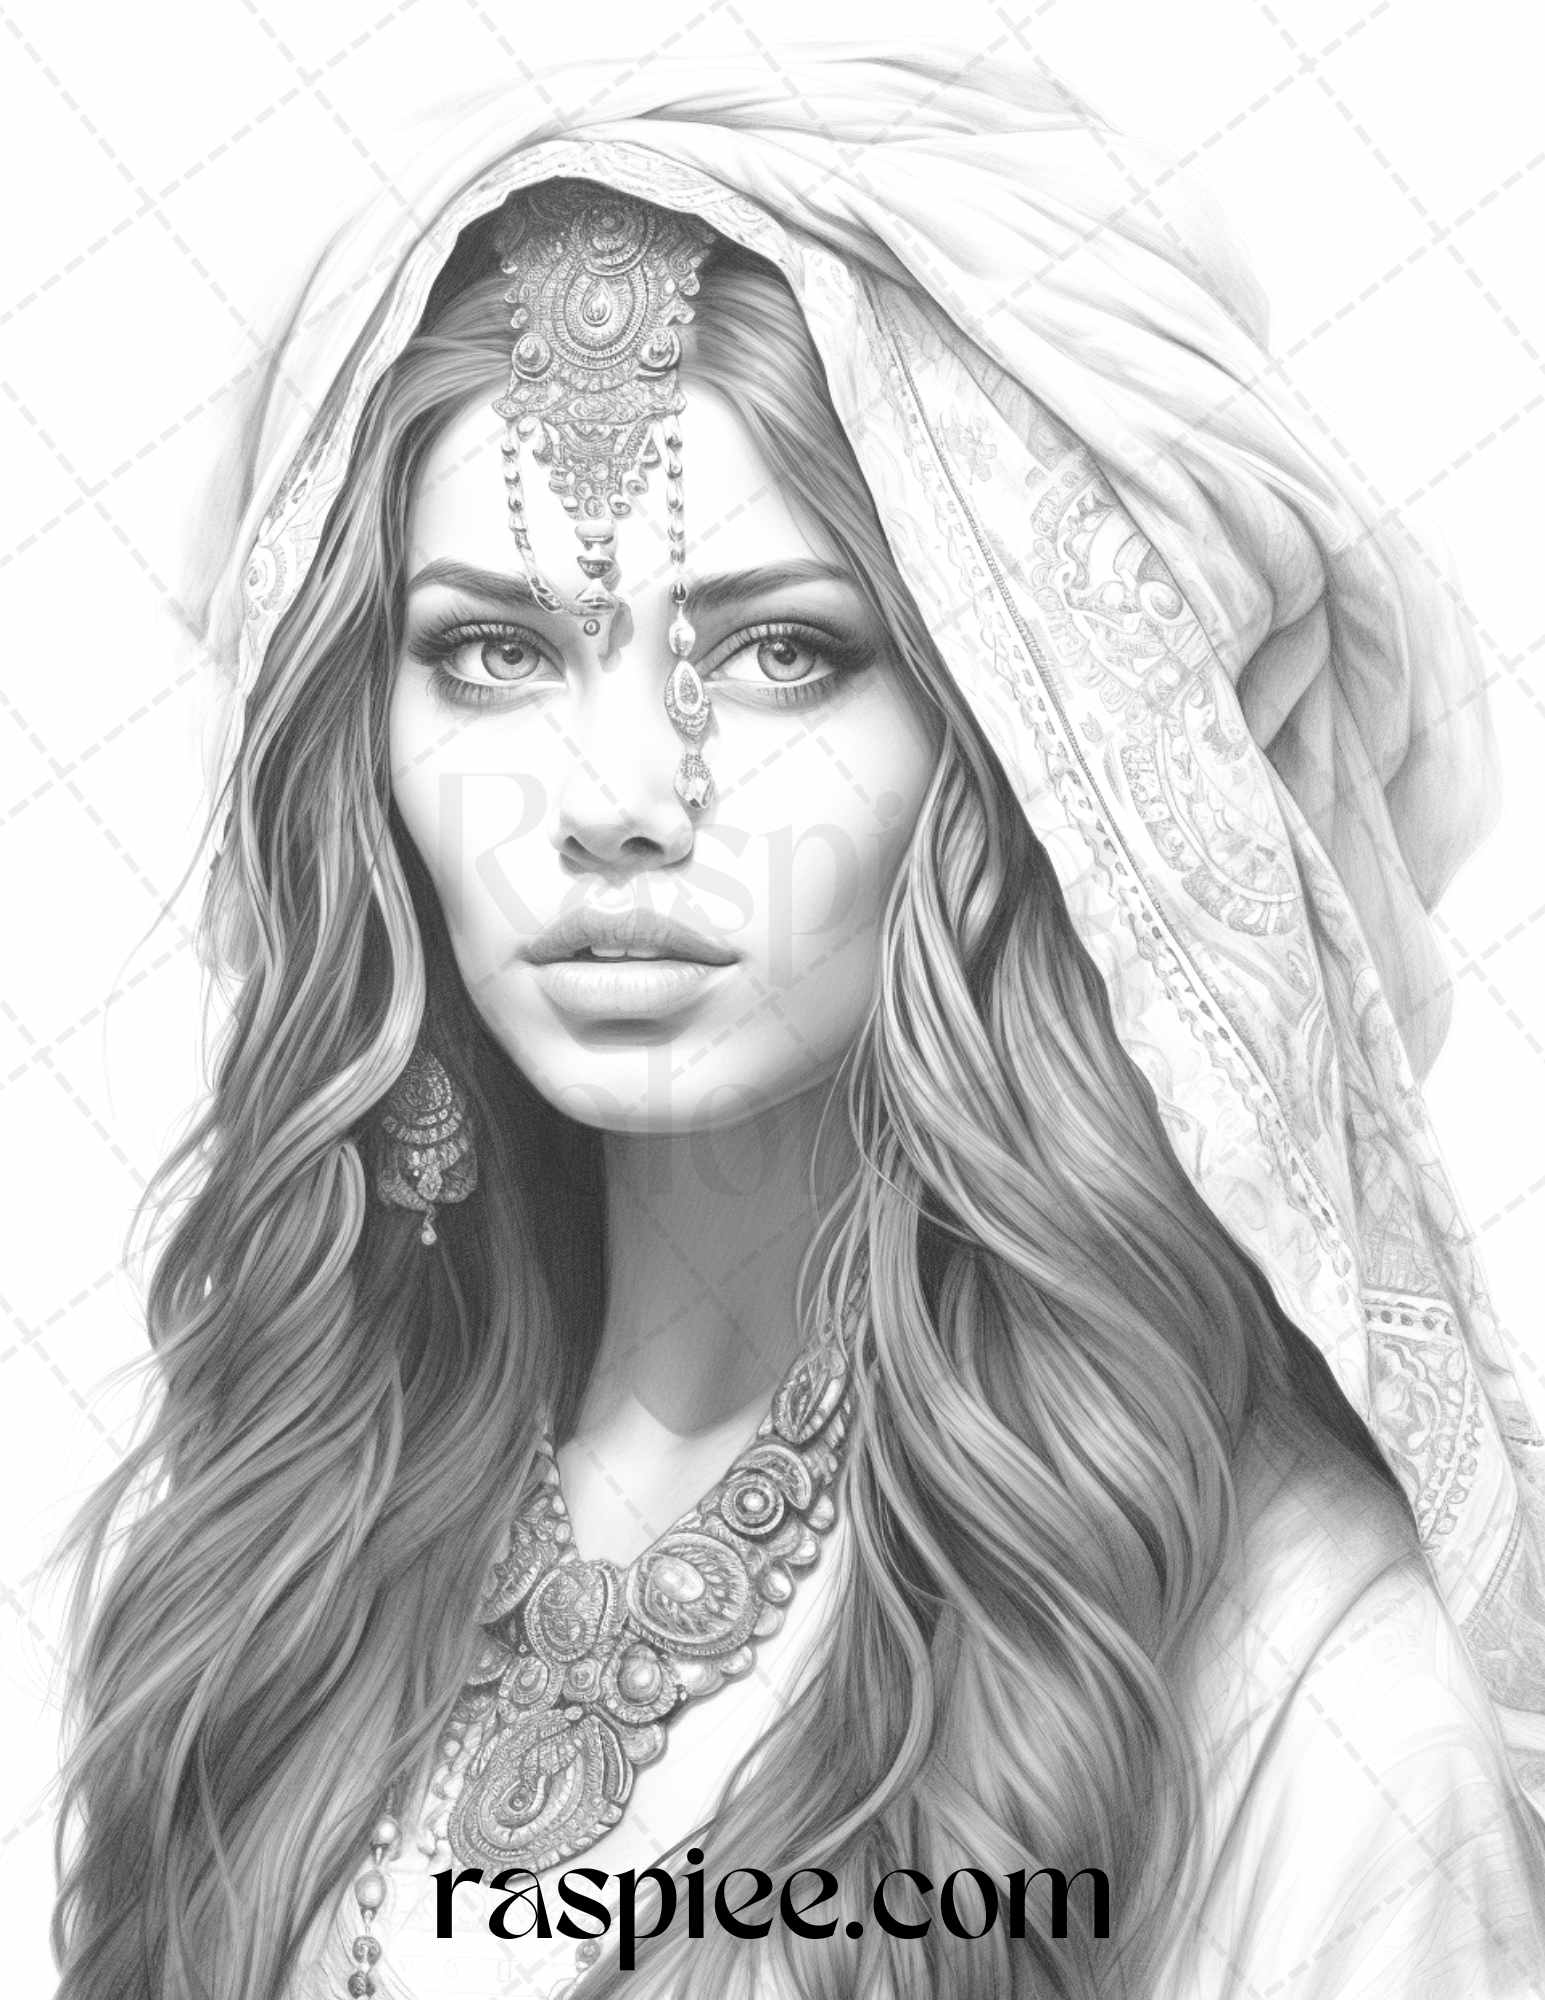 Gypsy Girls Grayscale Coloring Pages, Printable Adult Coloring Sheets, Artistic Stress Relief Coloring, Intricate DIY Coloring Pages, Portrait Coloring Pages for Adults